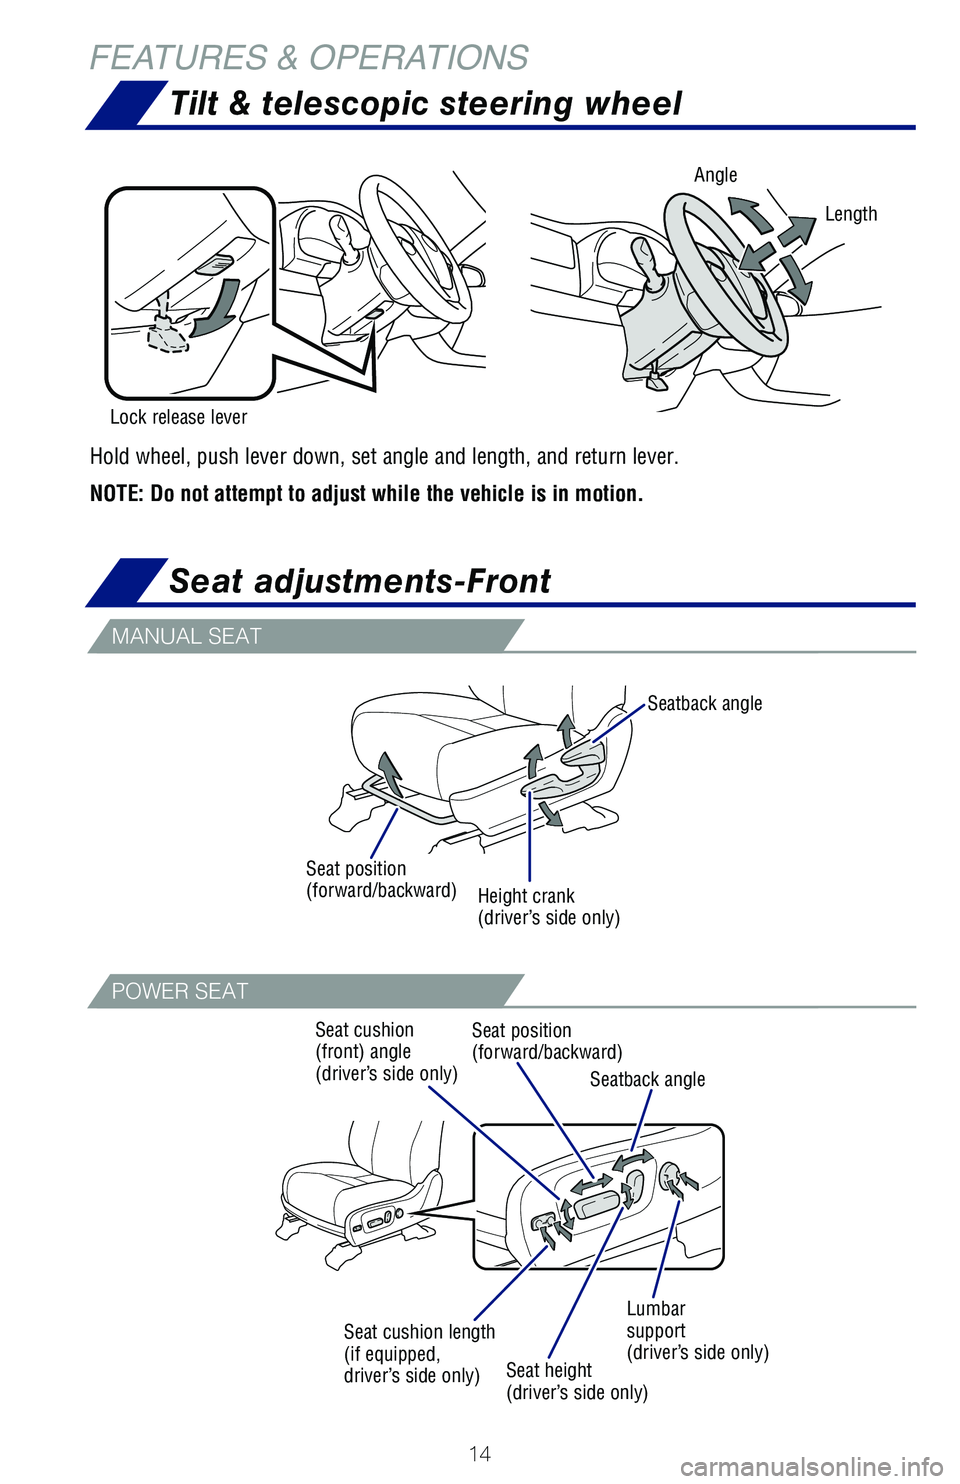 TOYOTA HIGHLANDER 2019  Owners Manual (in English) 14
Hold wheel, push lever down, set angle and length, and return lever.
Angle
Lock release lever
NOTE: Do not attempt to adjust while the vehicle is in motion.
Length
MANUAL SEAT
POWER SEAT
Seat posit